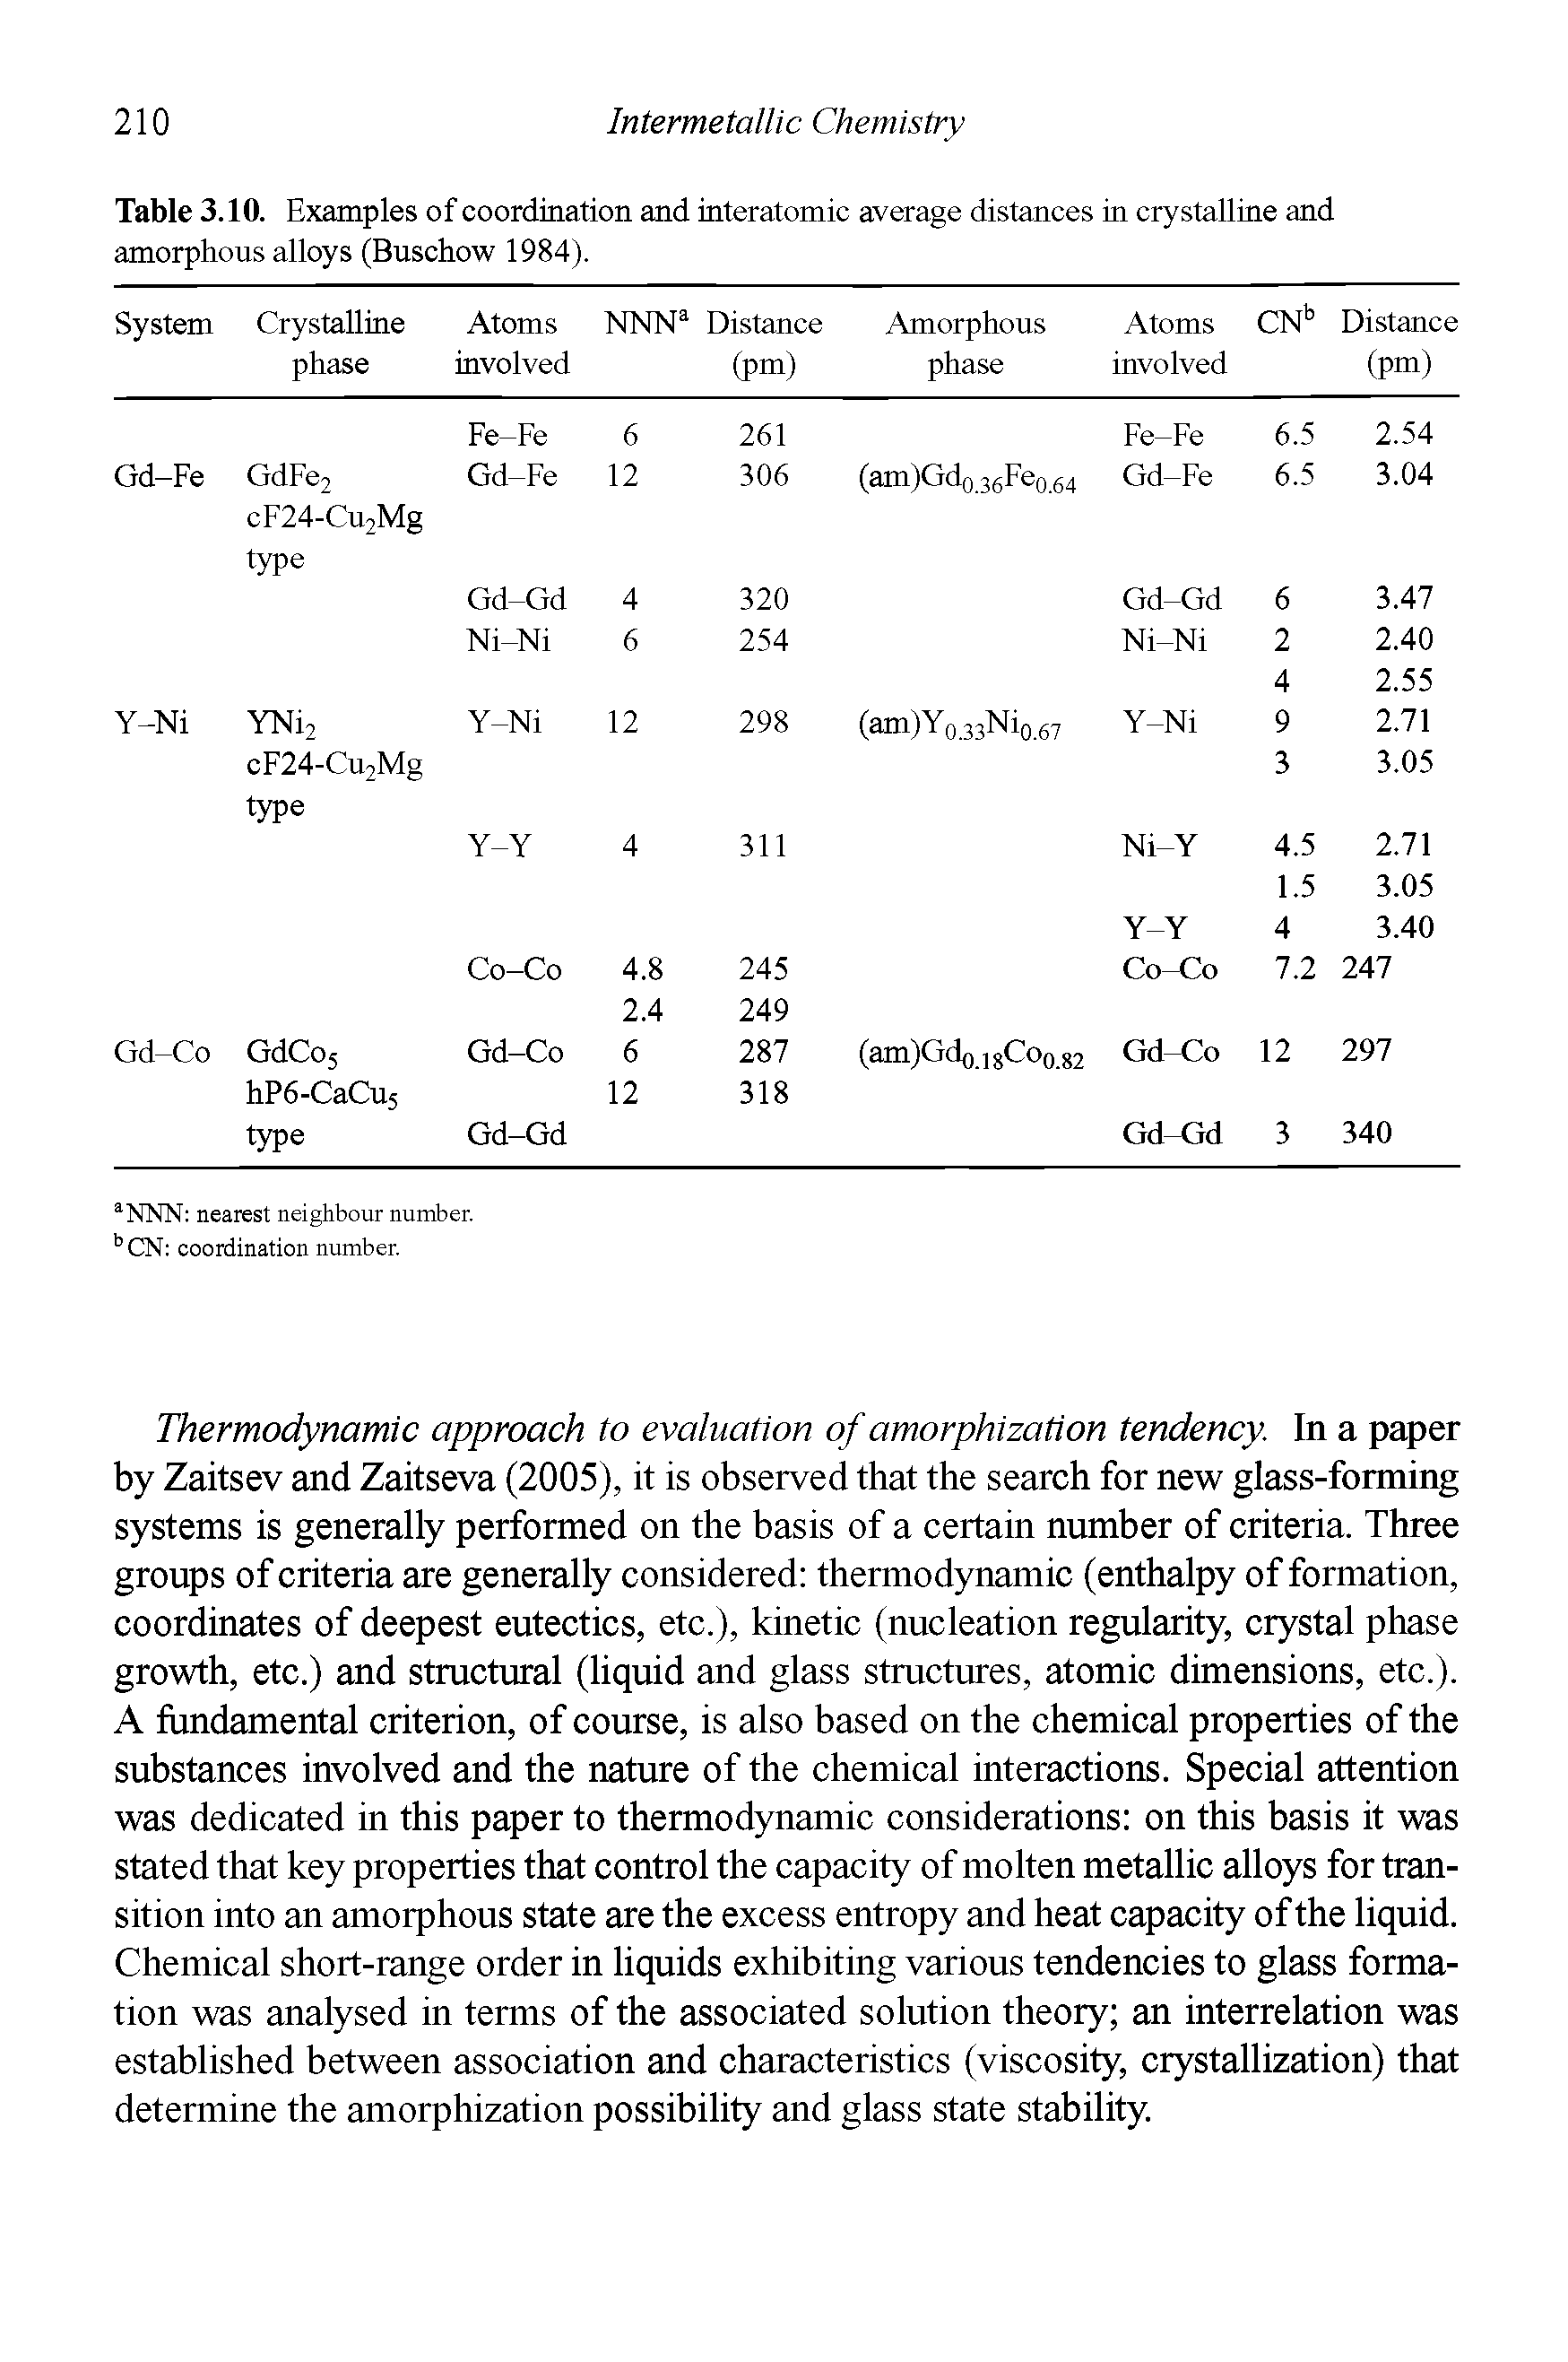 Table 3.10. Examples of coordination and interatomic average distances in crystalline and amorphous alloys (Buschow 1984).